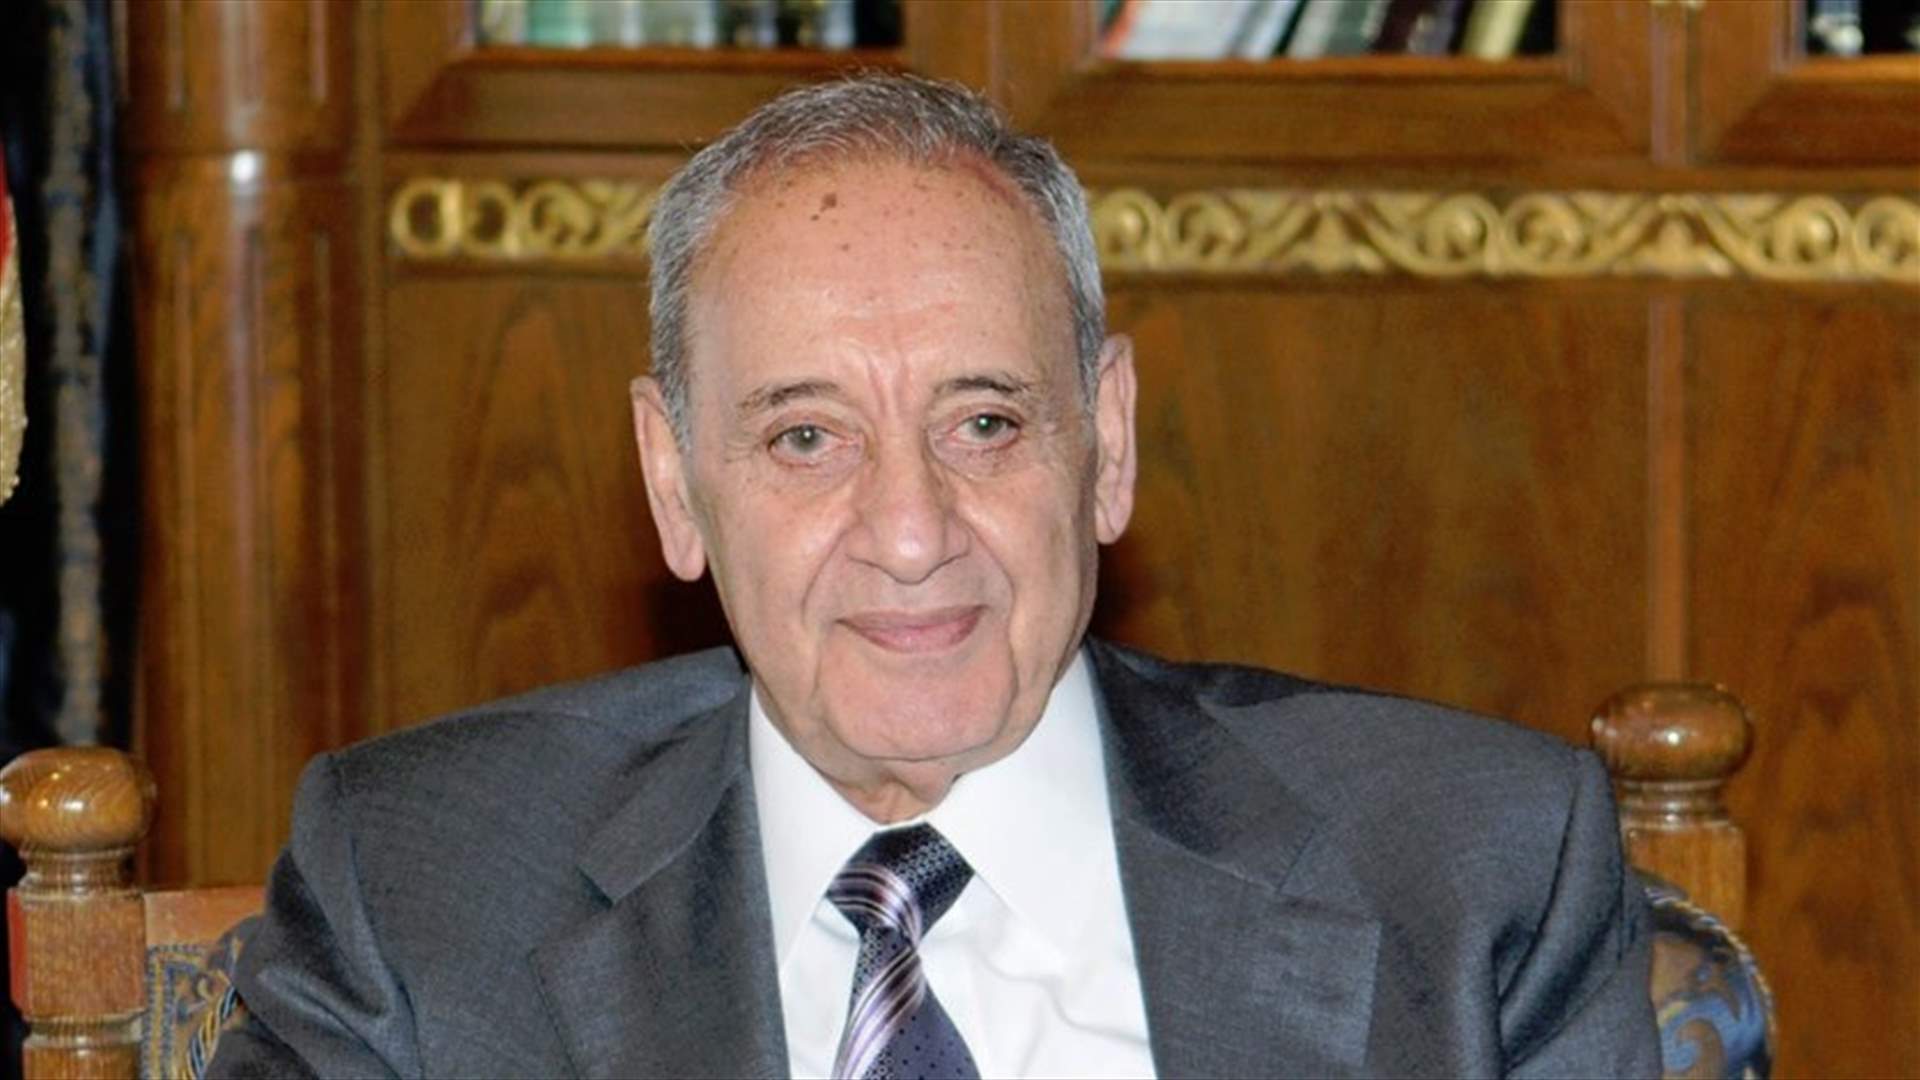 Berri during Wednesday gathering: No updates in terms of cabinet formation